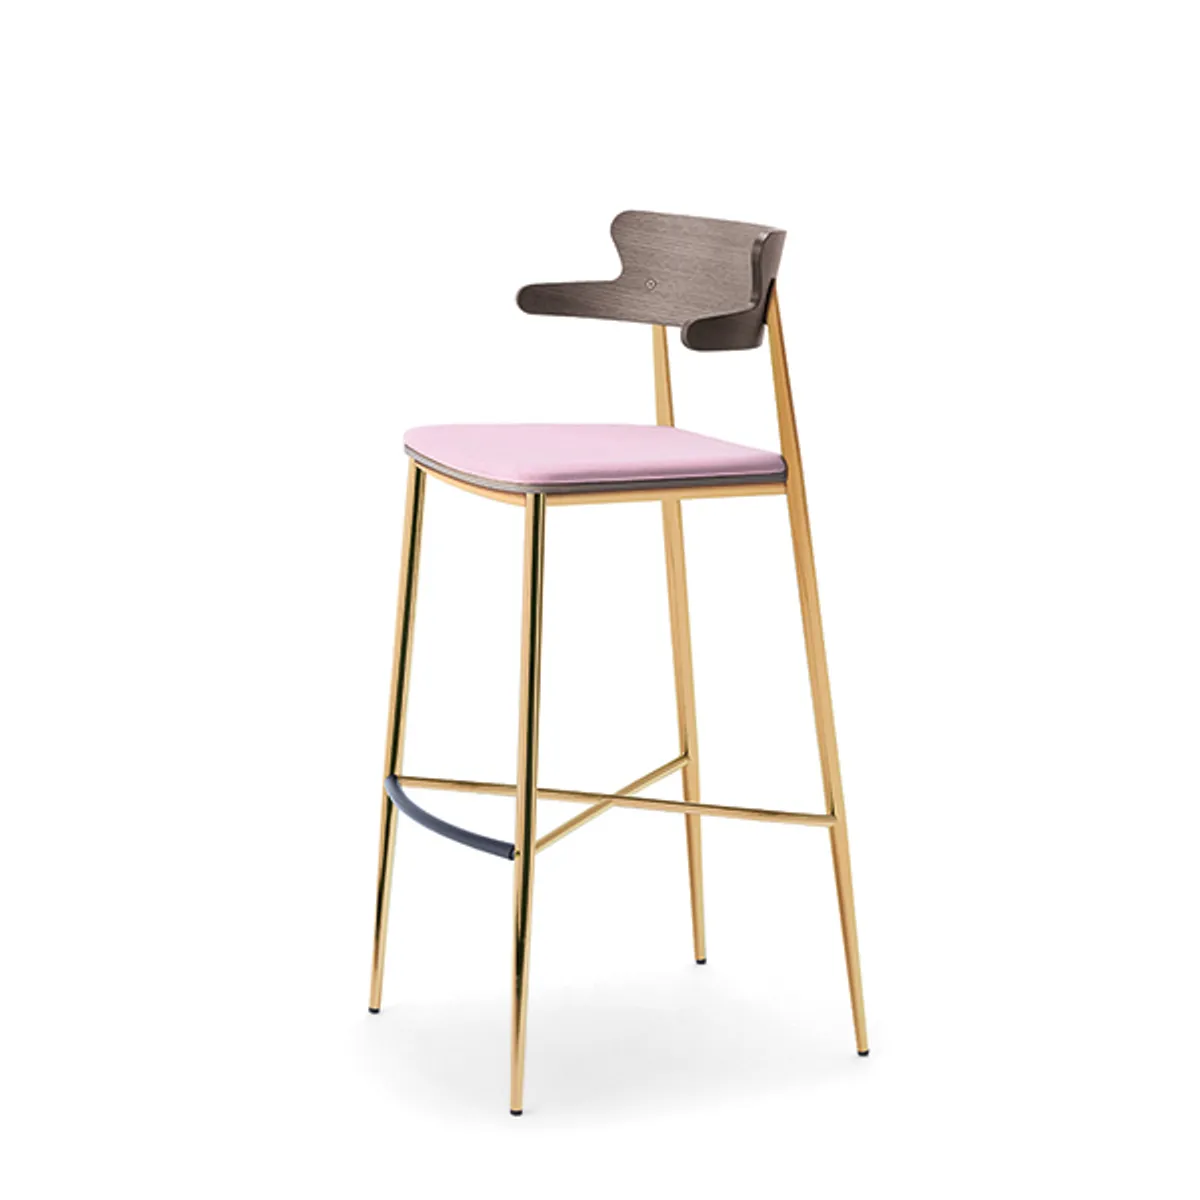 Brooklyn Bar Stool Brass Frame Inside Out Contracts